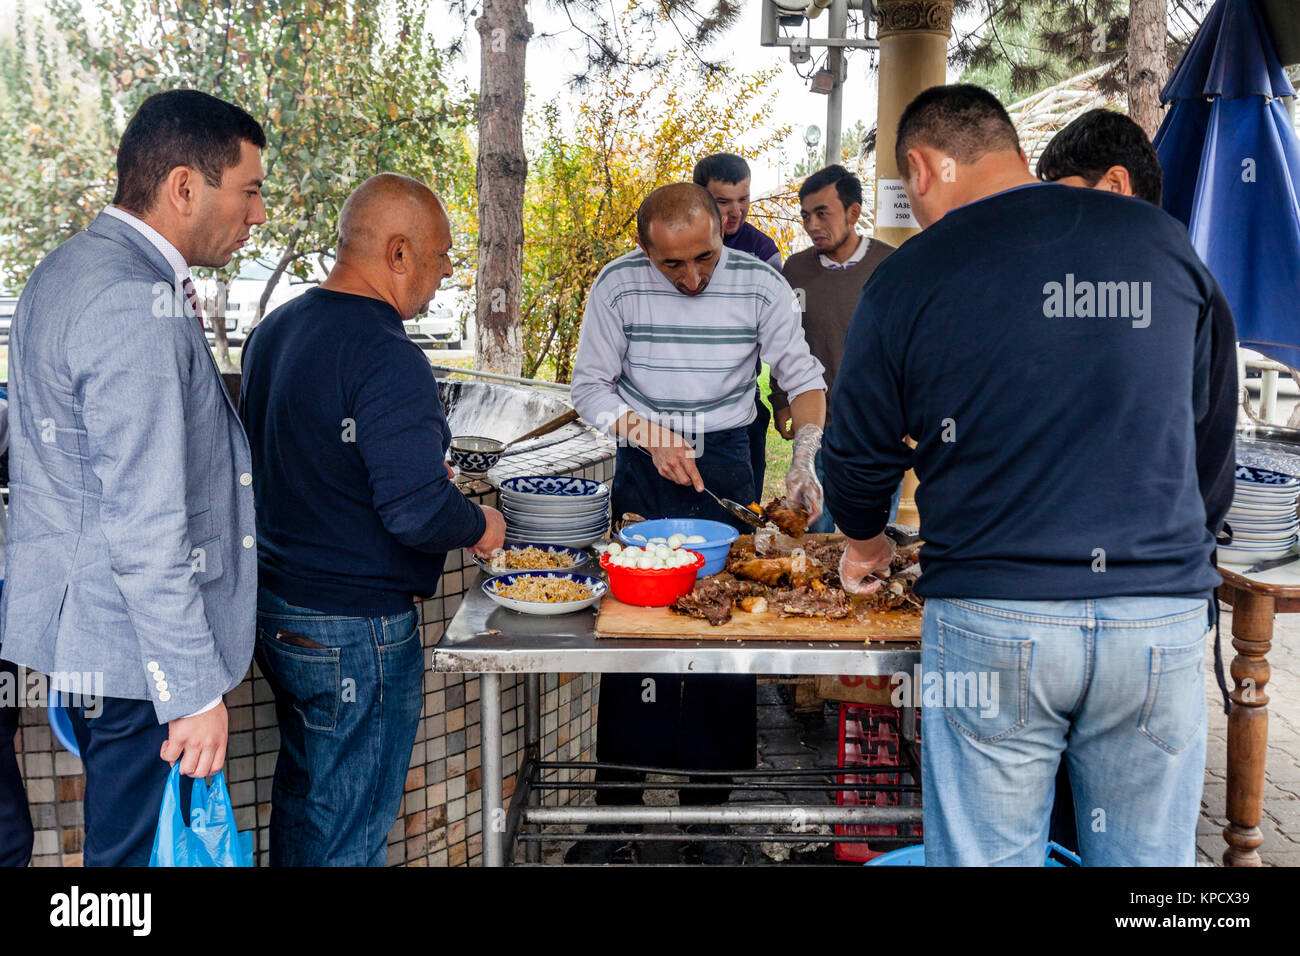 Men Cooking and Serving PLOV (The National Dish) At The Central Asian Plov Centre, Tashkent, Uzbekistan Stock Photo